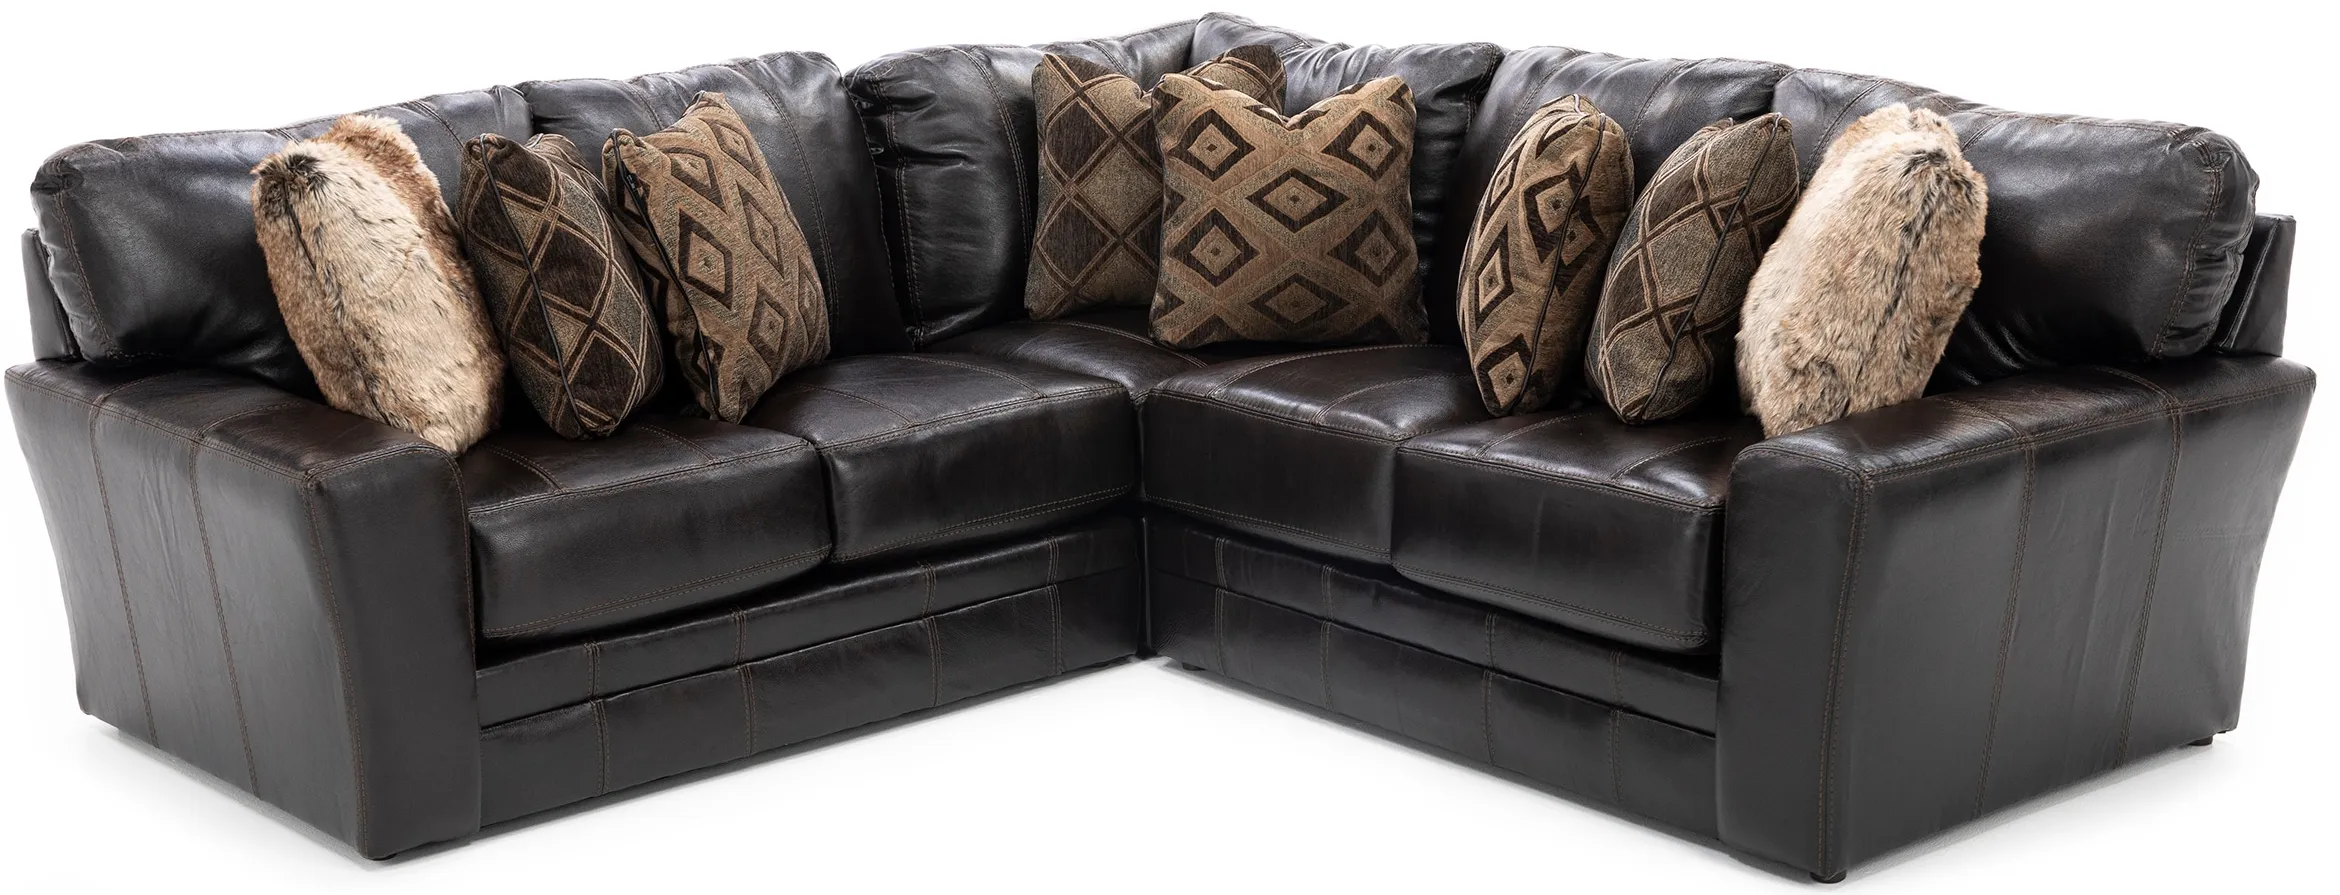 Camden 3-Pc. Leather Sectional in Chocolate